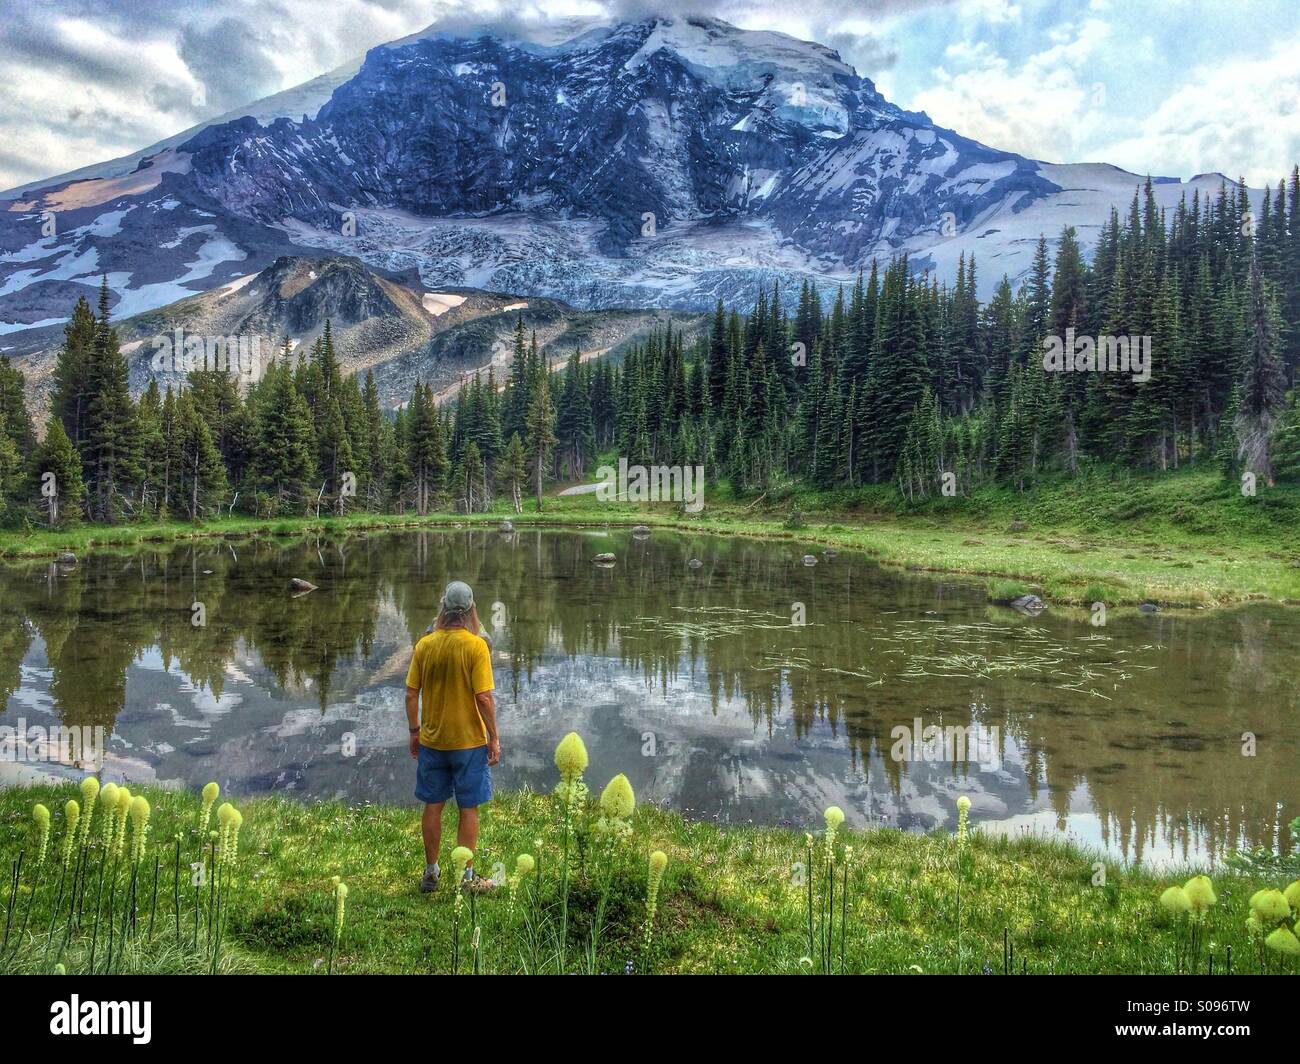 Hiker standing next to small pond reflecting Mount Rainier along the Wonderland Trail in Mount Rainier National Park. Stock Photo